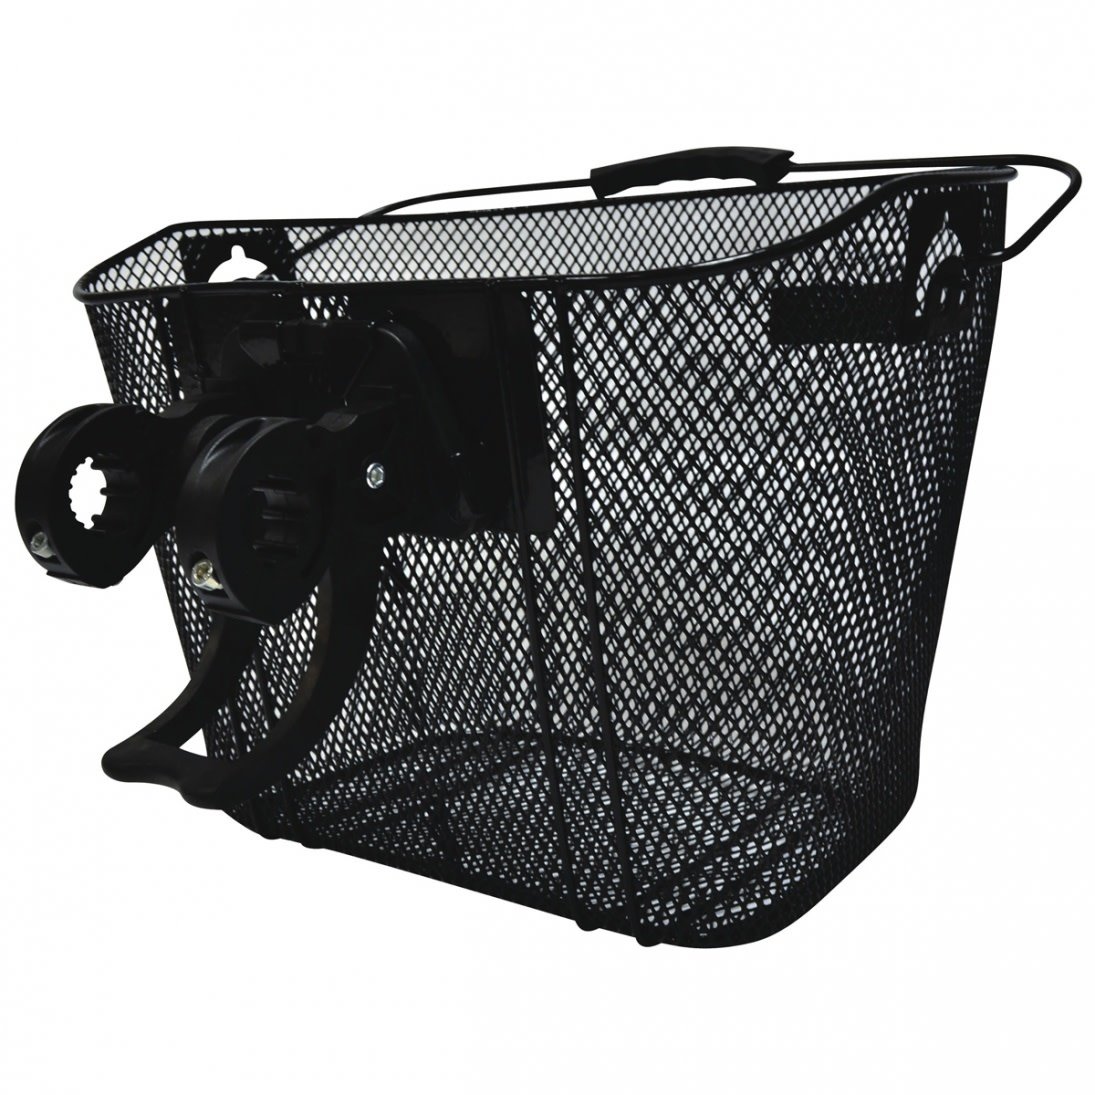 You added <b><u>Basket Oxford Mesh Basket With Quick Release Bracket</u></b> to your cart.